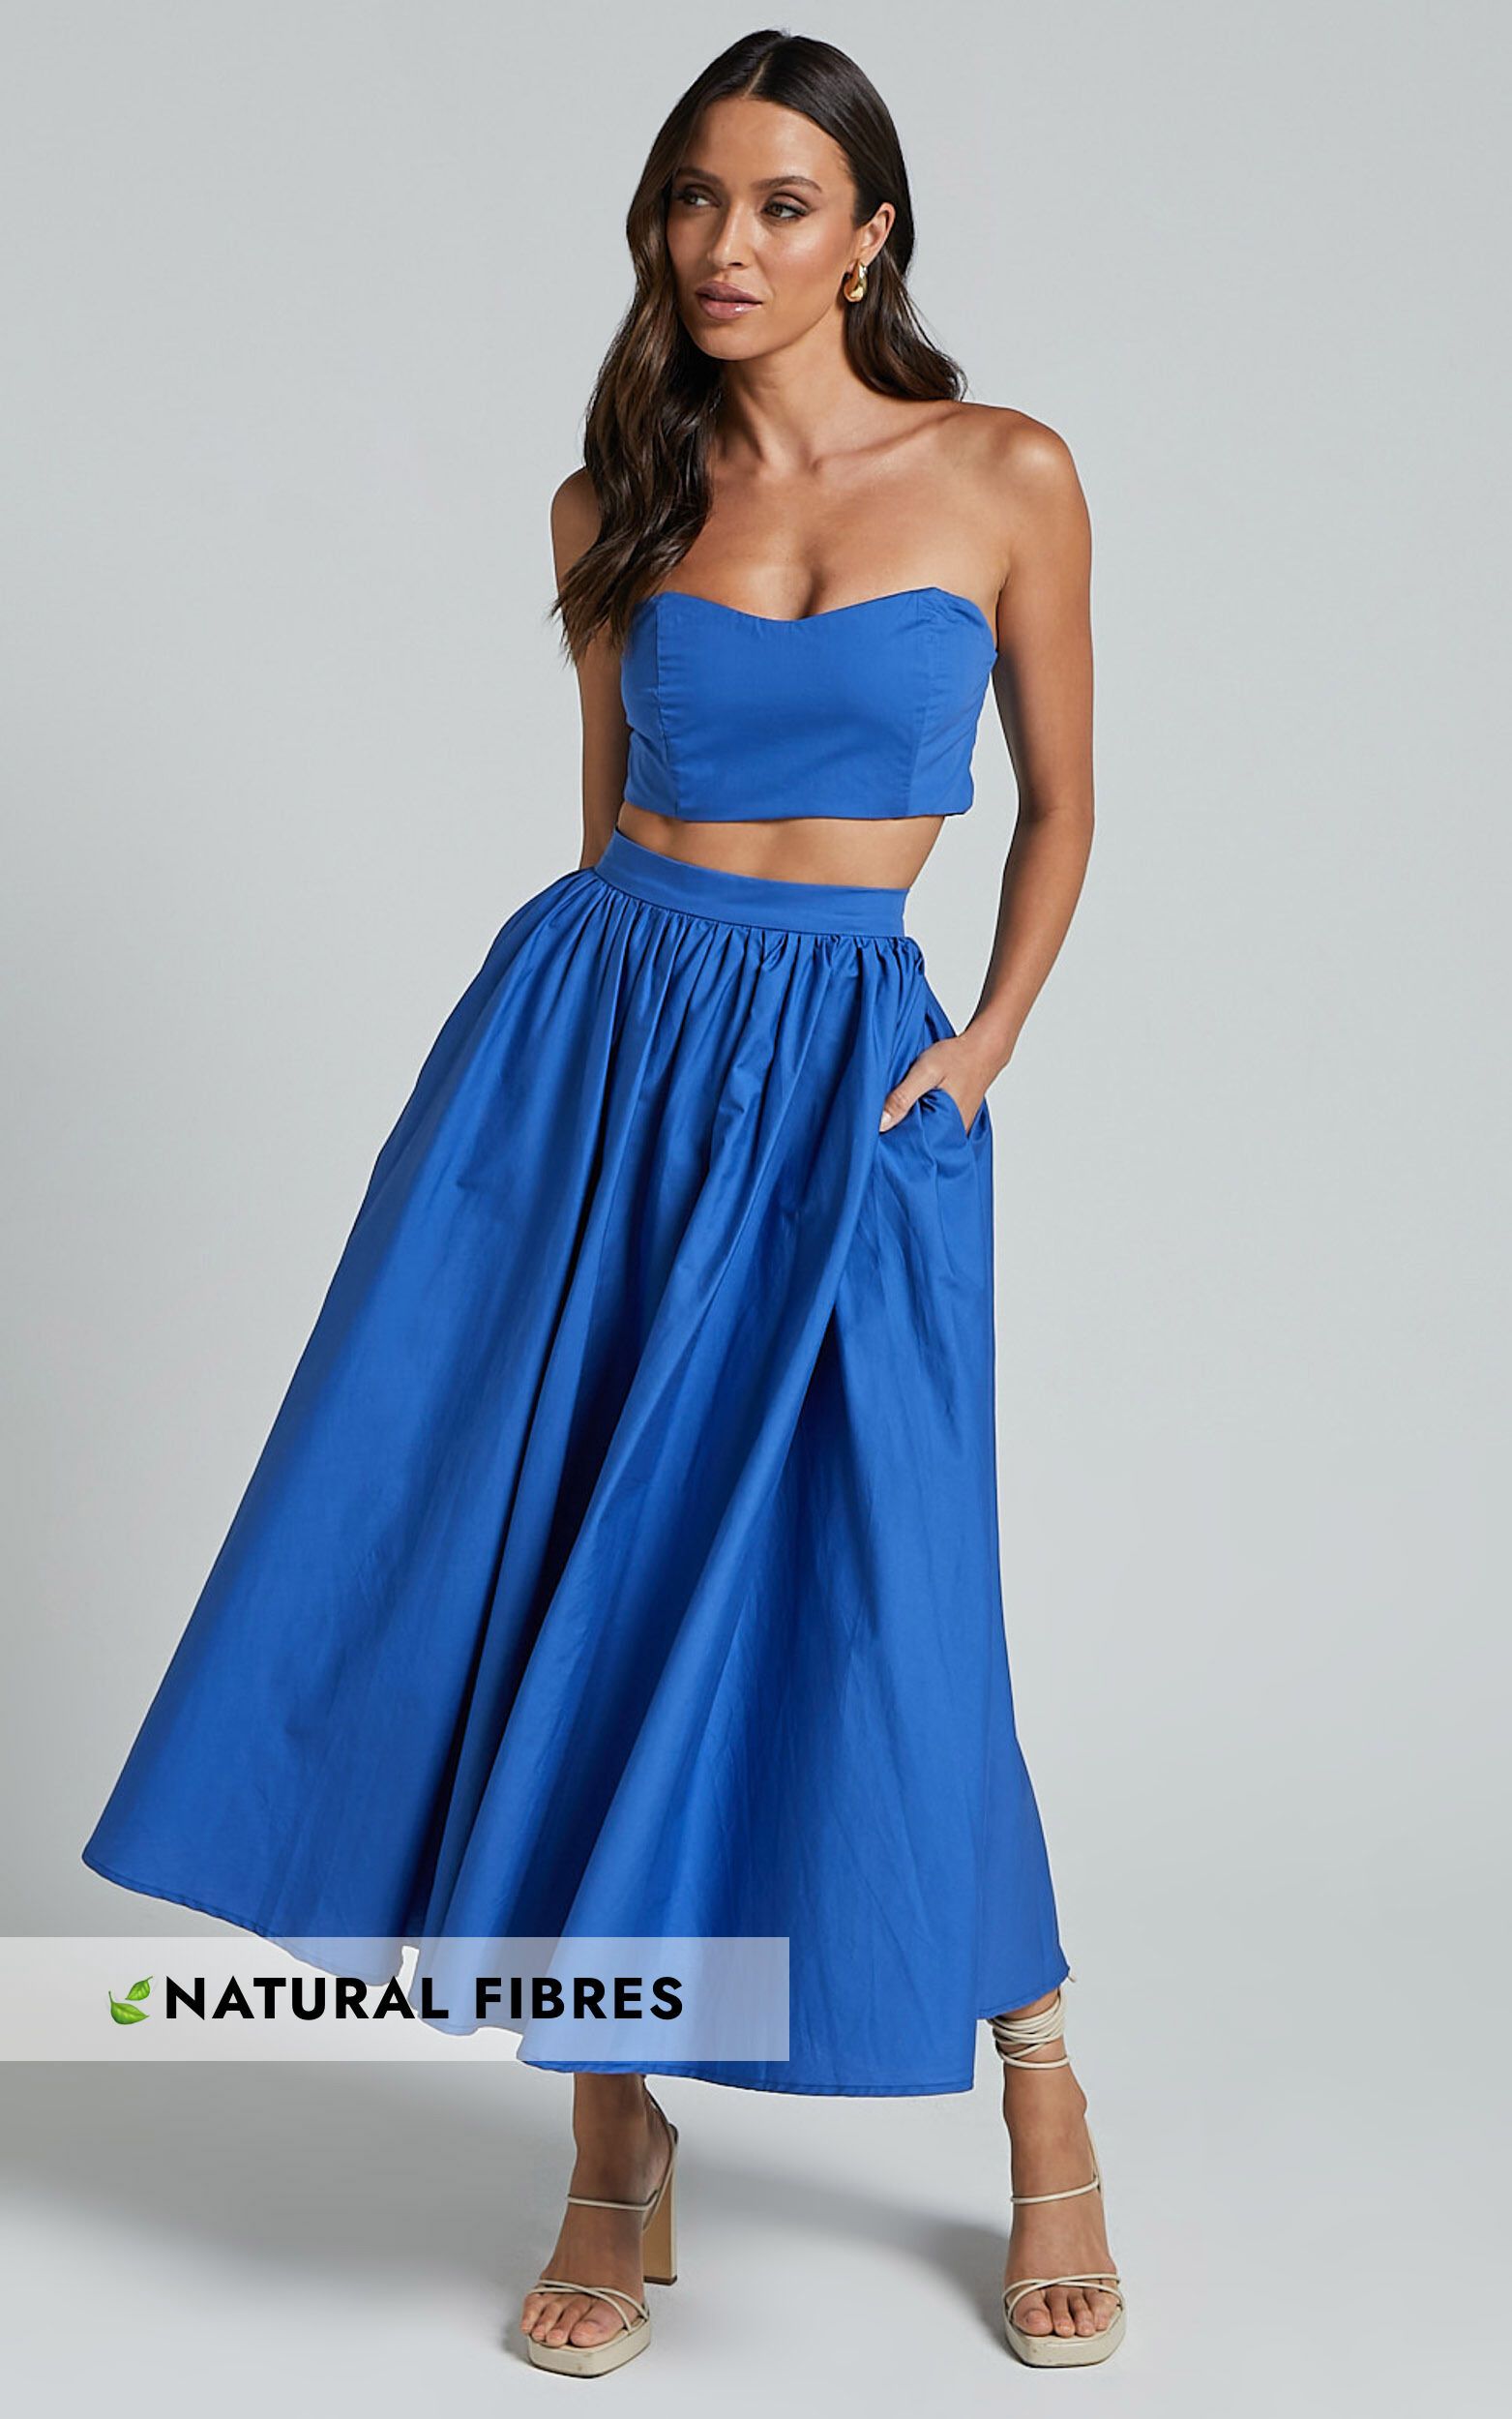 Olympia Two Piece Set - Strapless Corset Top and Full Midi Skirt Set in Cobalt Blue | Showpo (US, UK & Europe)